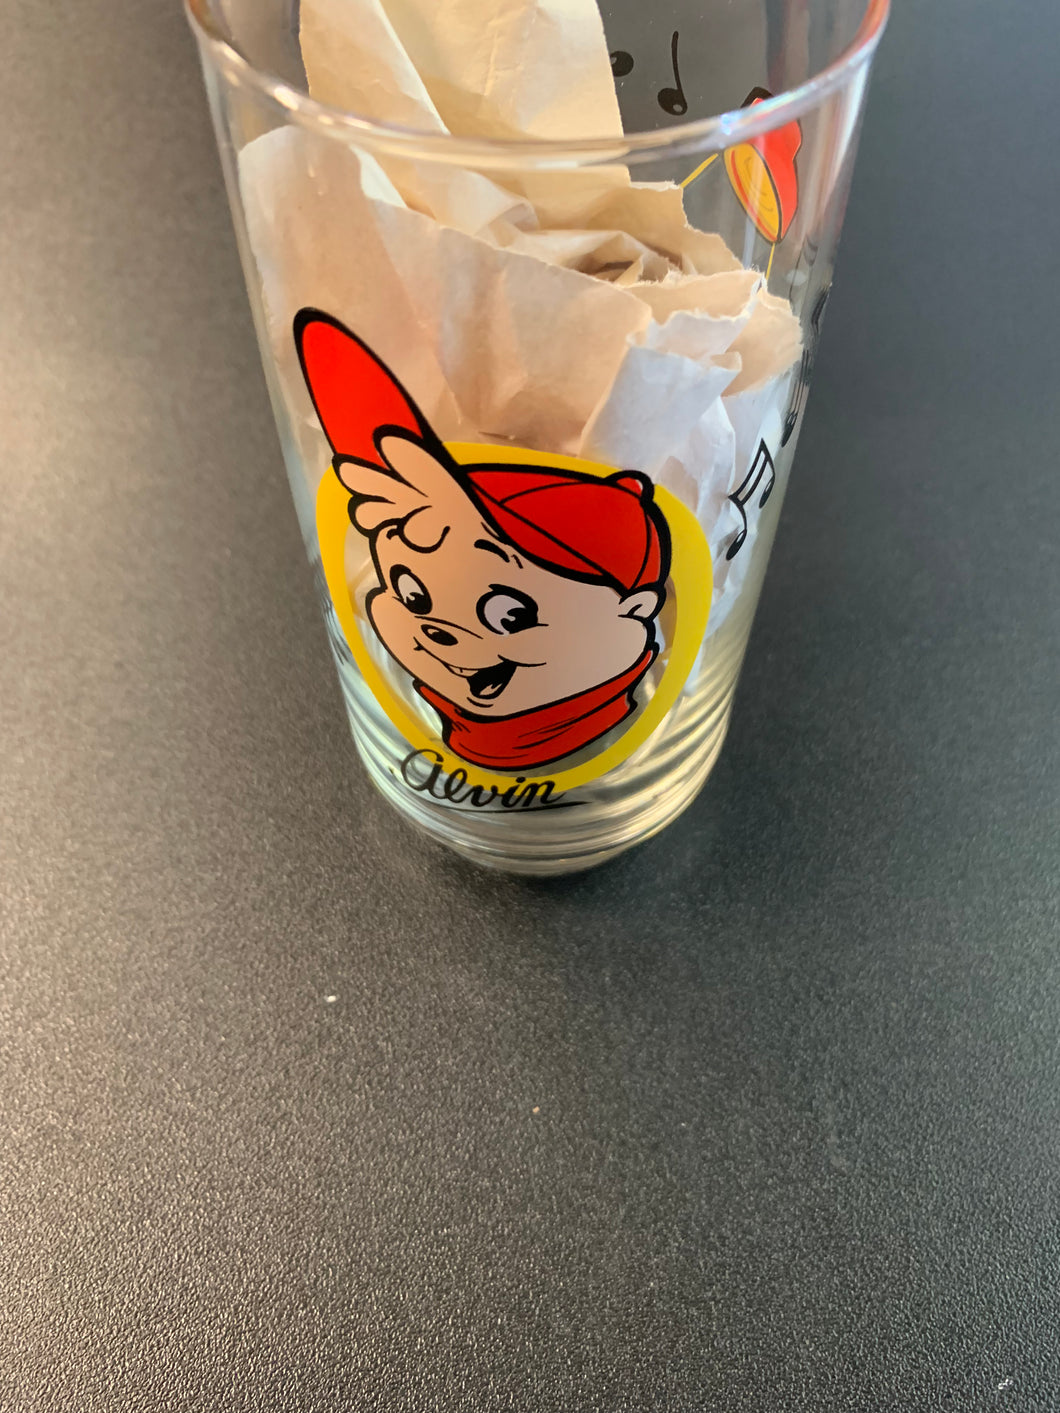 ALVIN AND THE CHIPMUNKS ALVIN 1985 DRINKING GLASS